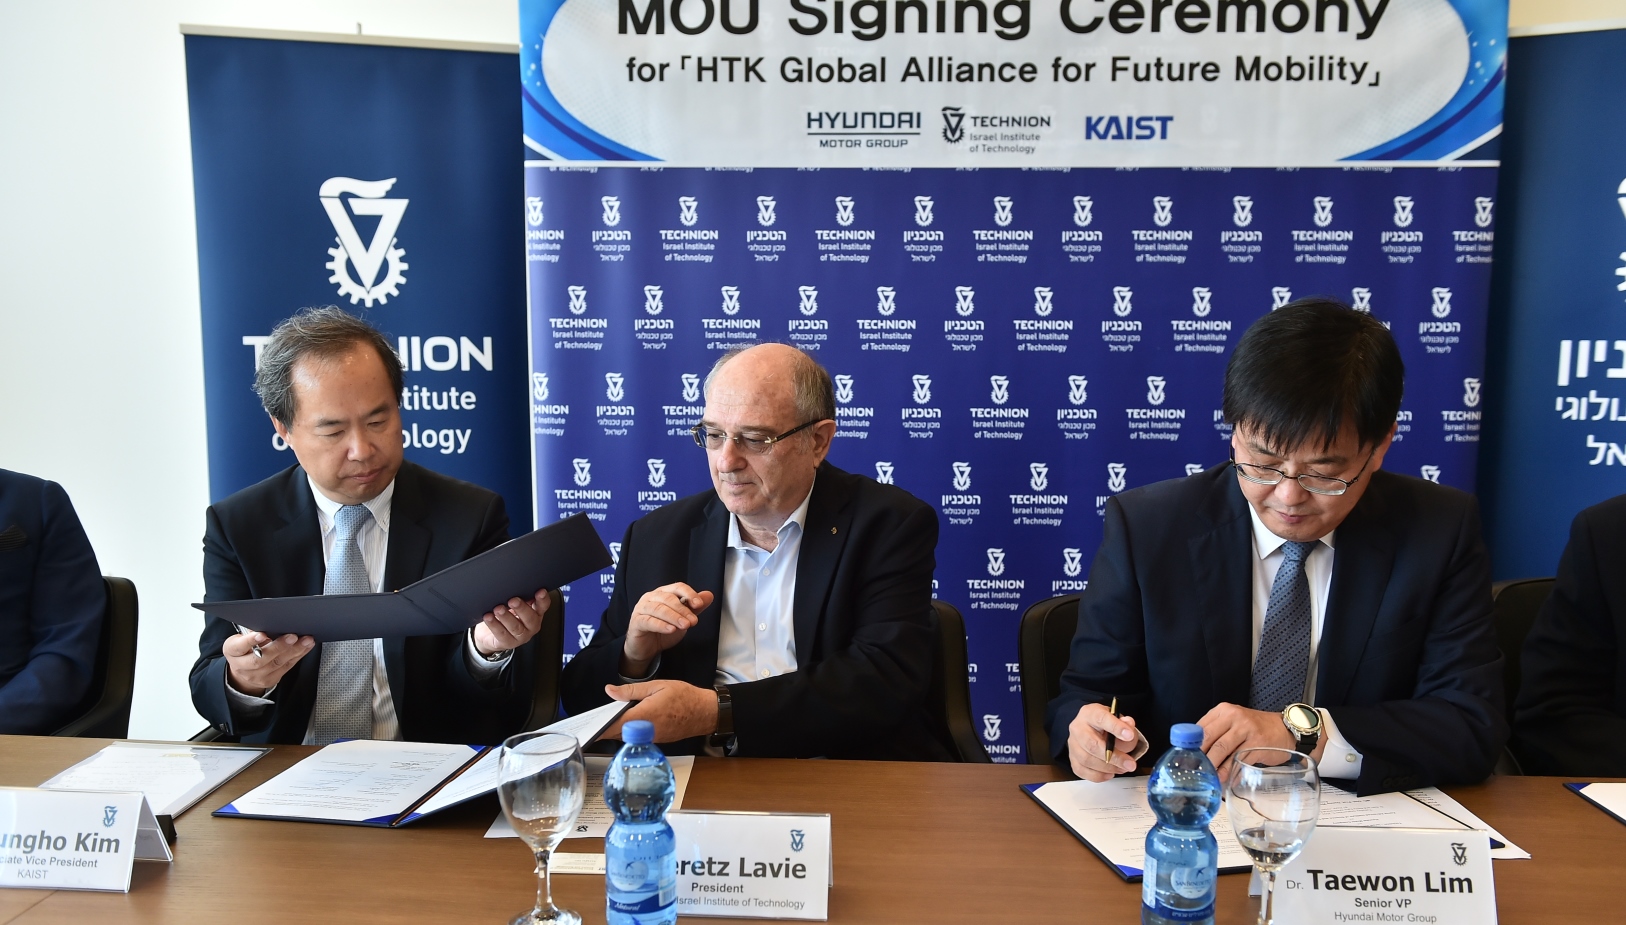 At the MOU signing ceremony, from left, Prof. Joungho Kim of KAIST, Technion President Prof. Peretz Lavie, and Dr. Taewon Lim, head of Hyundai Technology Innovation Center. Photo by Nitzan Zohar/Technion spokesperson's office